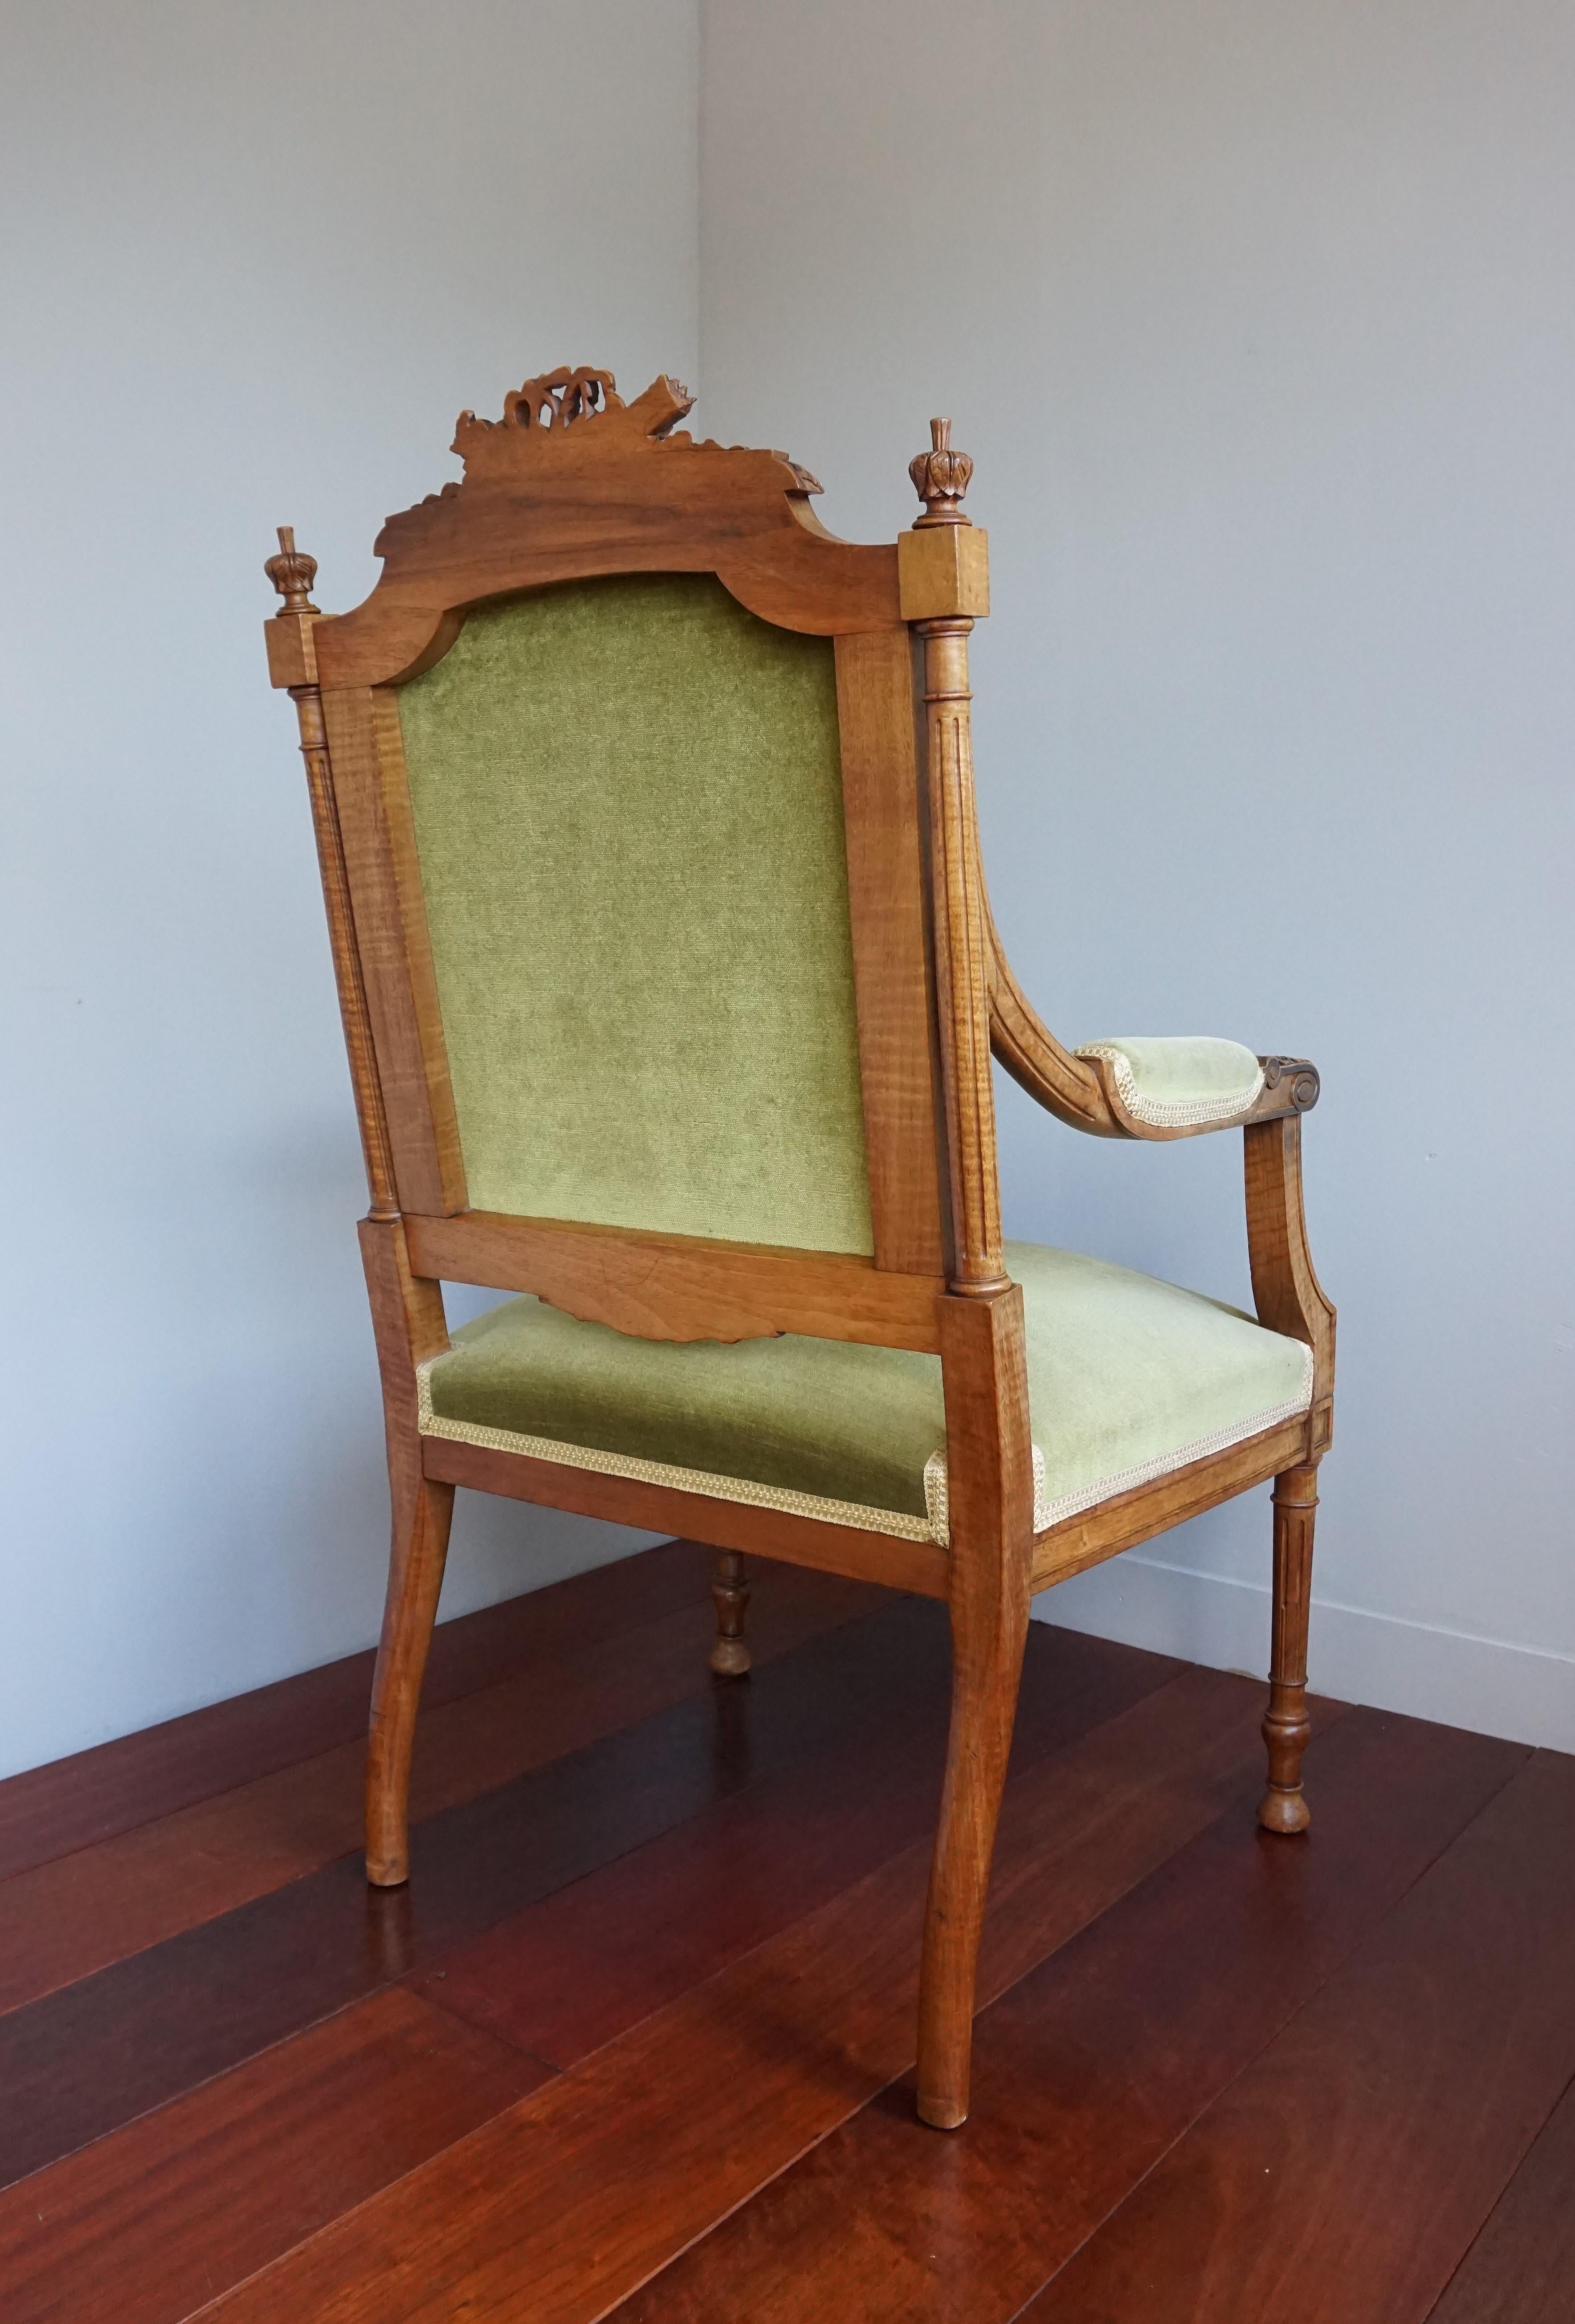 Velvet Beautiful Antique Hand Carved Nutwood Chair / Armchair With Green Upholstery For Sale